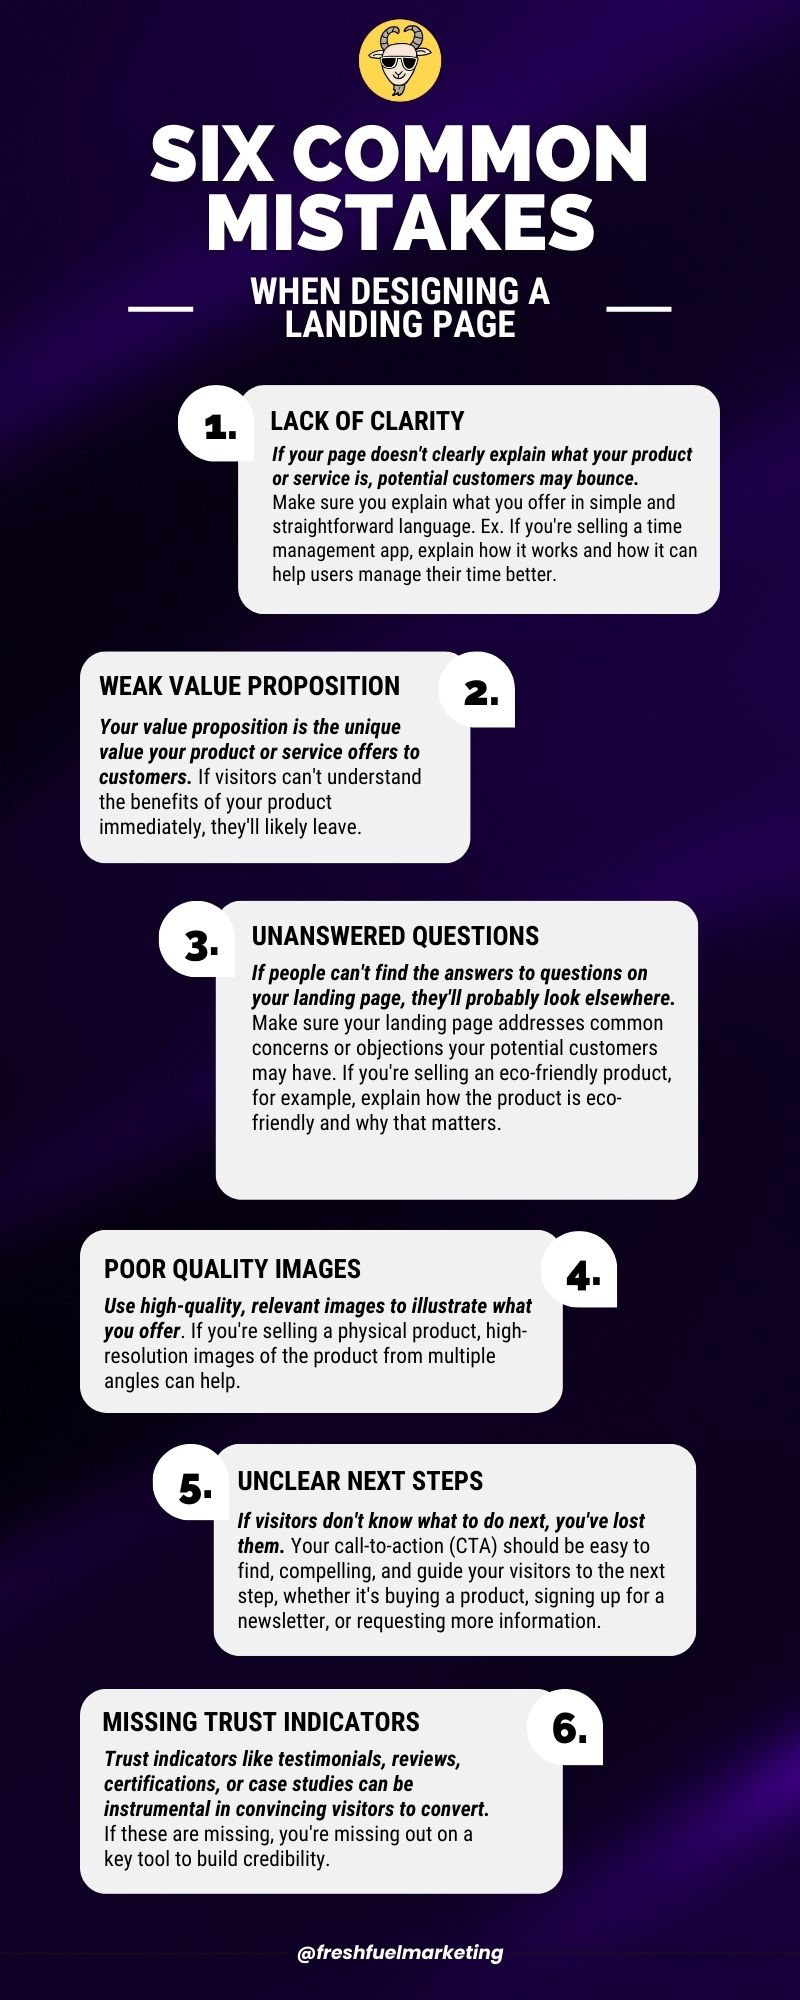 Six Common Mistakes when Designing a Landing Page infographic Fresh Fuel Marketing